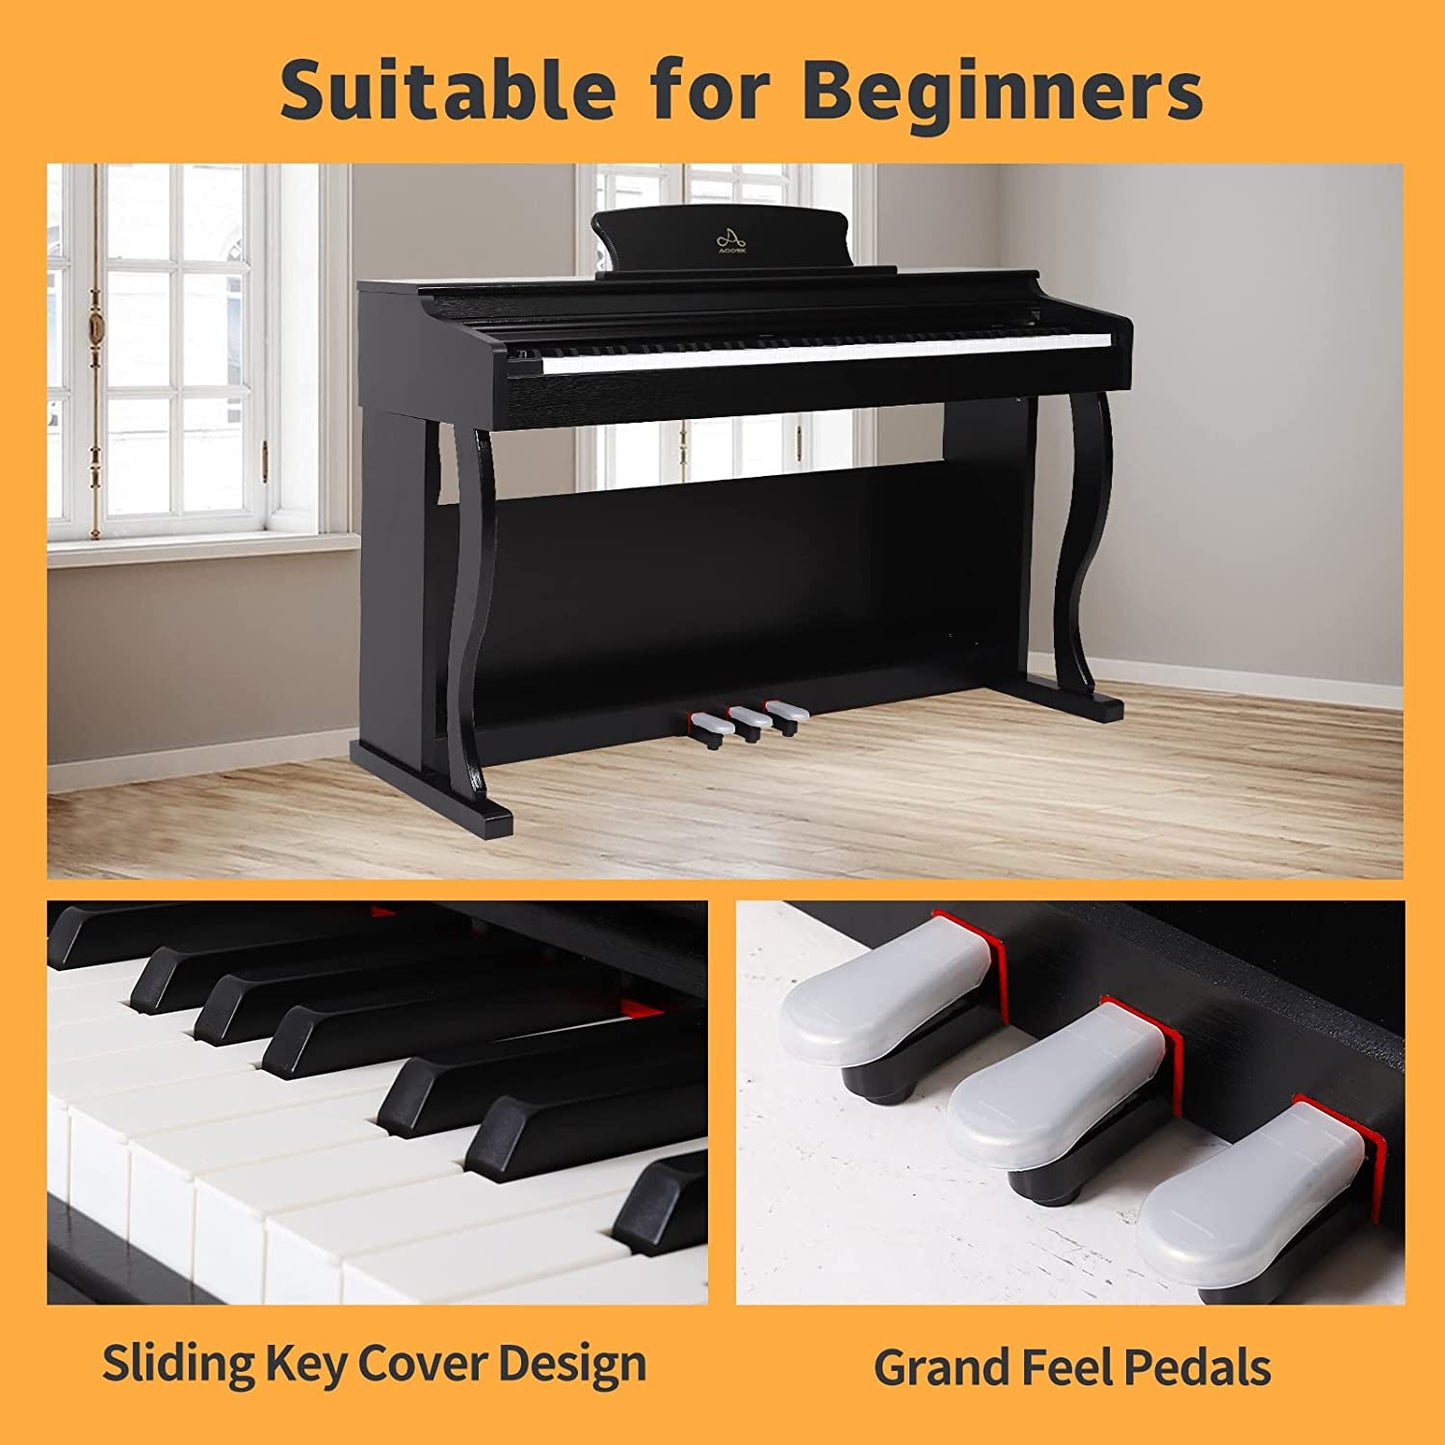 Digital Piano,AODSK 88 Key Weighted Hammer Action Digital Piano with Full-Size Weighted Keys,Beginner Bundle with Furniture Stand,Slide Key Cover,Black (UPB-91)